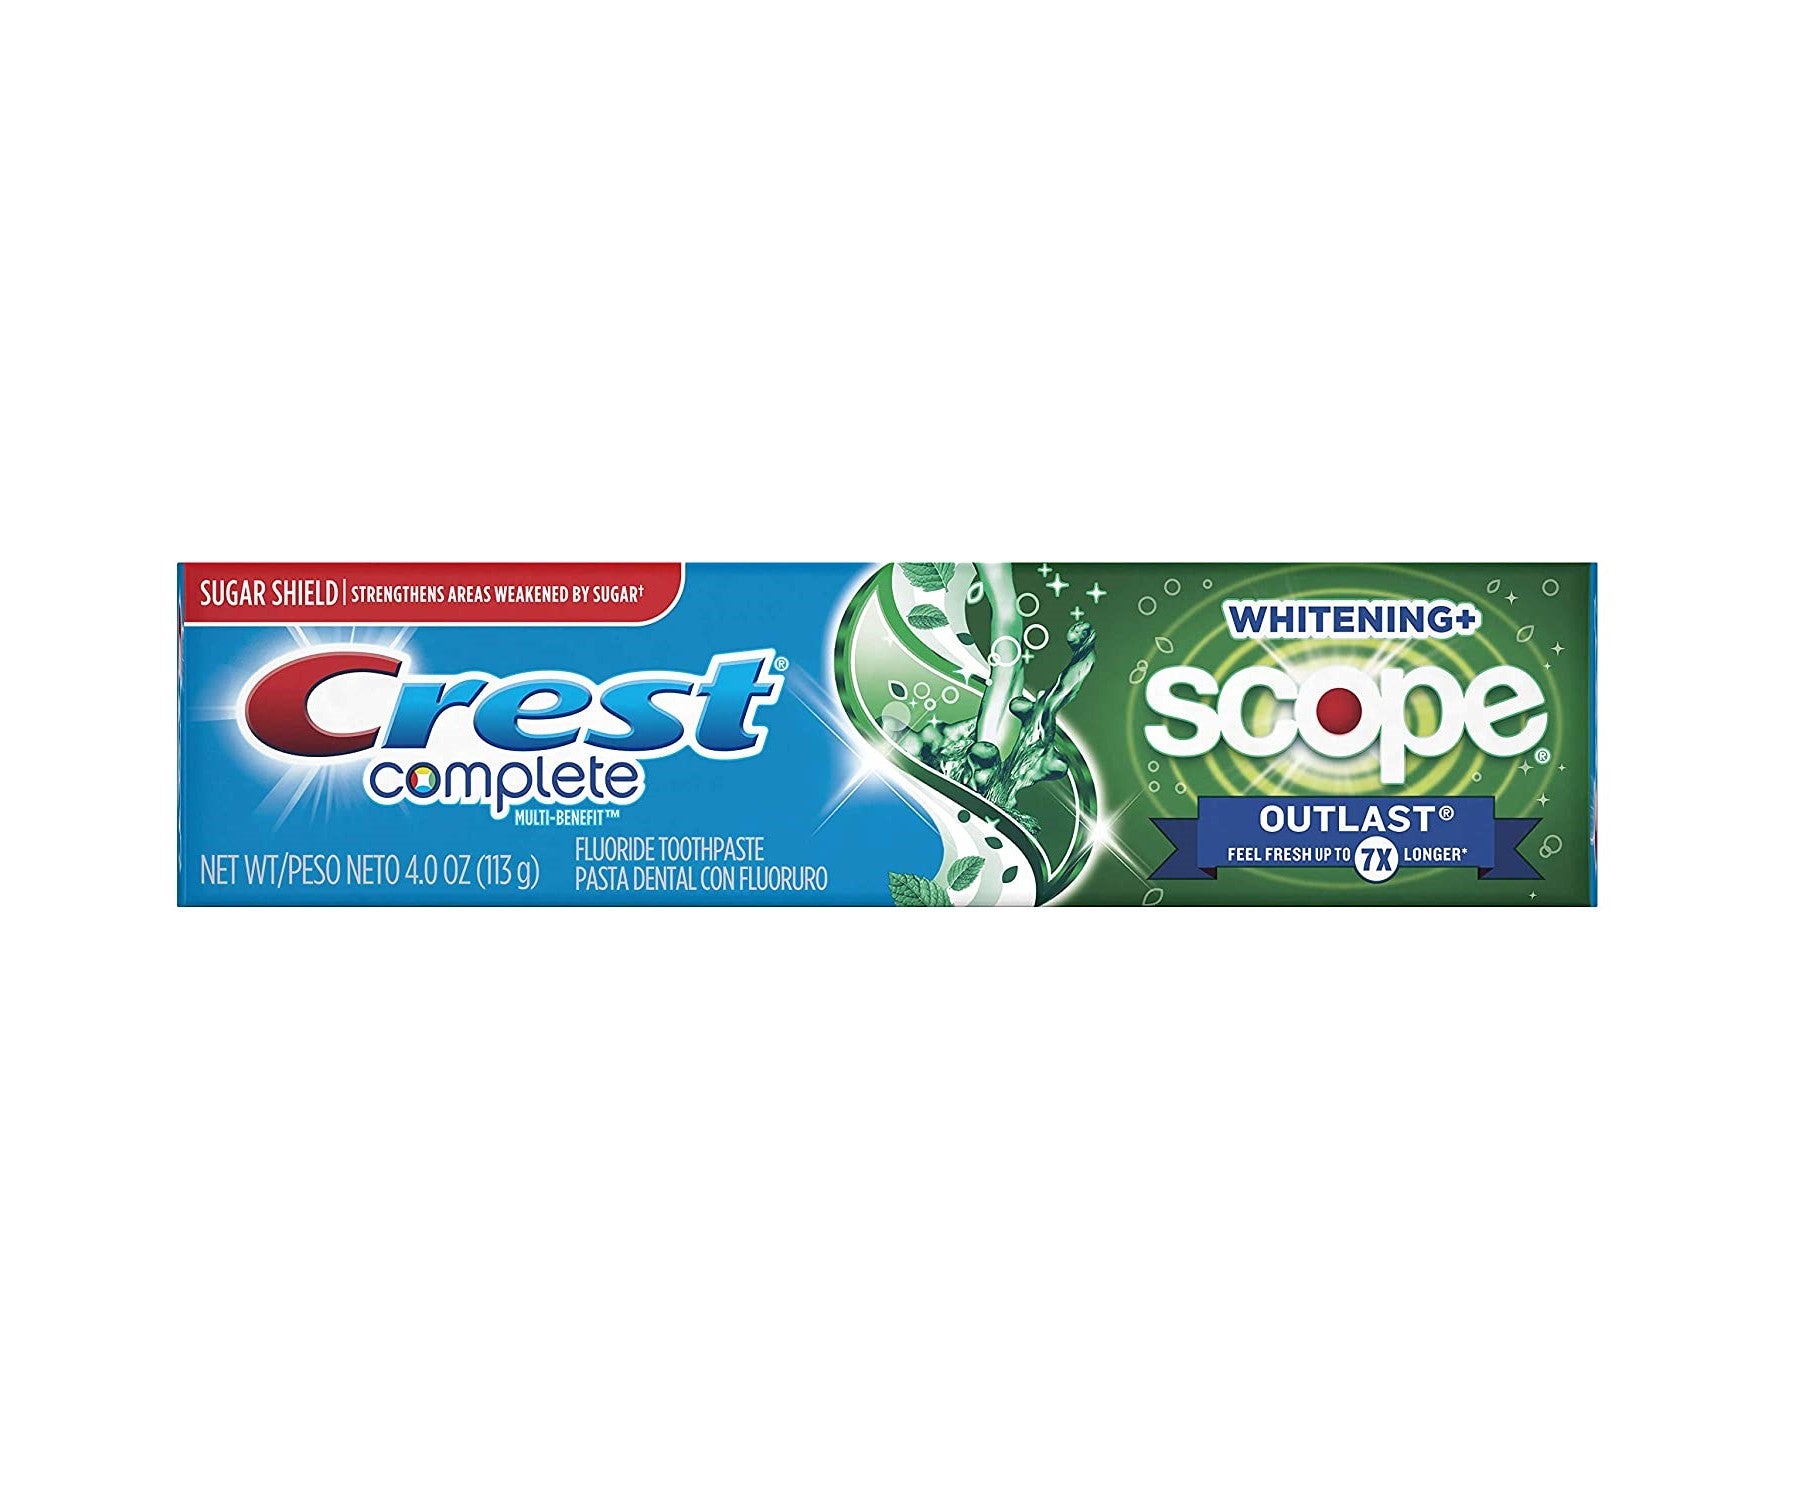 Crest Plus Anti-cavity Fluoride Toothpaste 6.5oz (184 g) (5 in a pack)